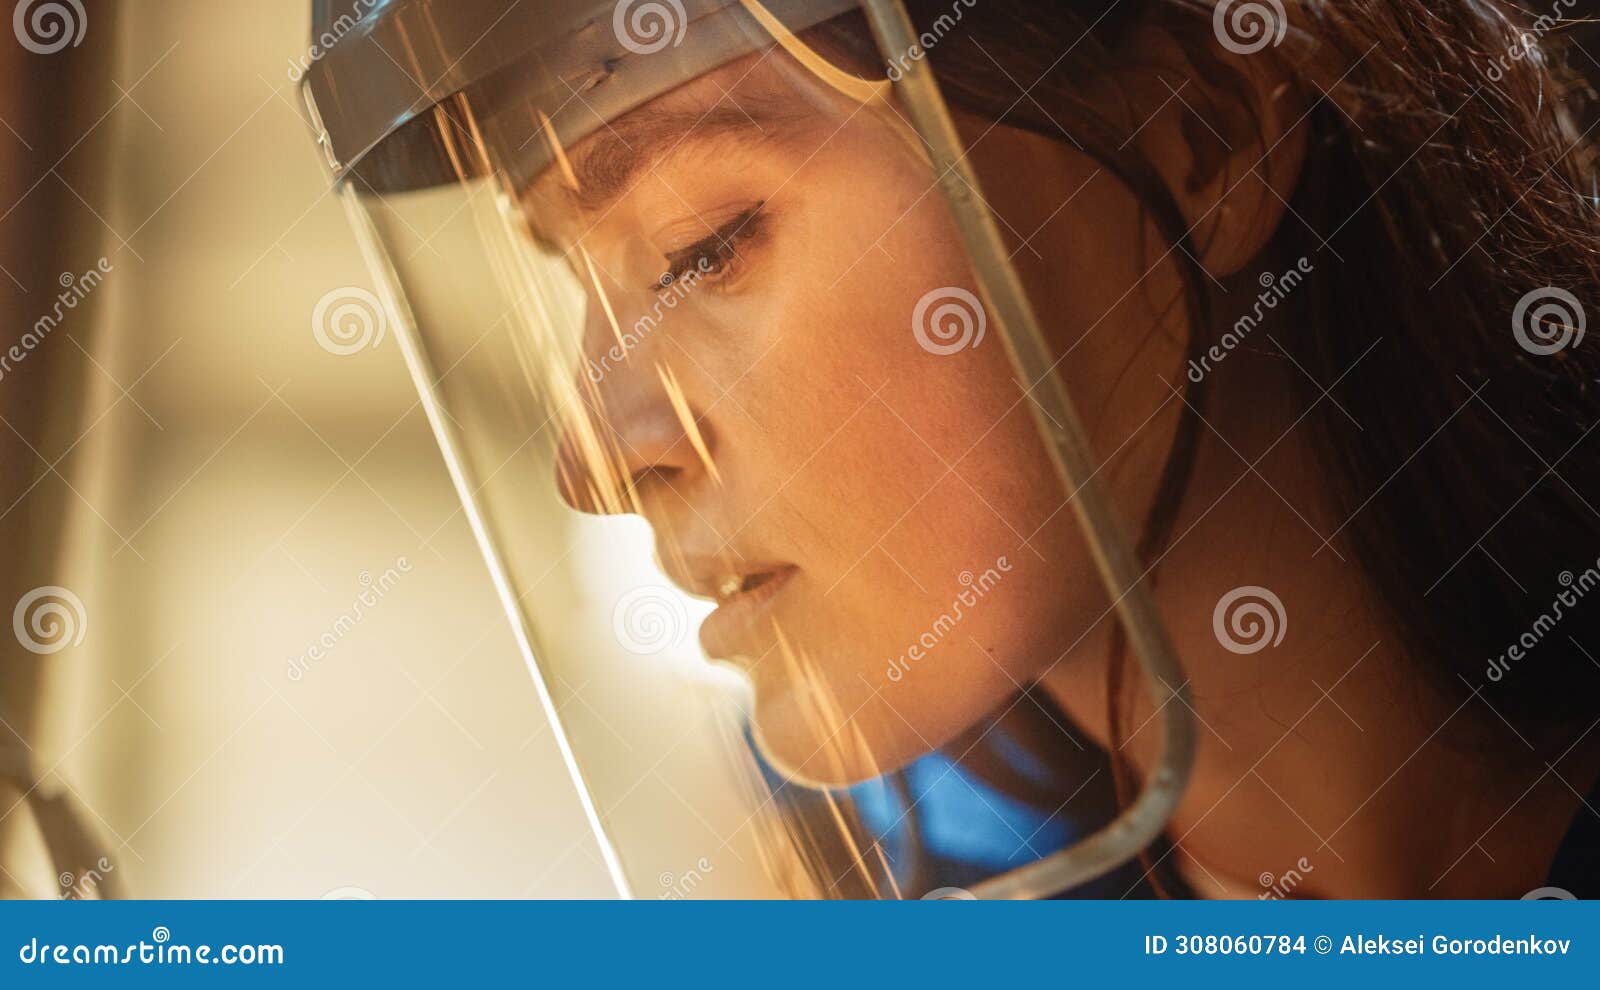 close up portrait of beautiful female fabricator in safety mask. she is grinding a metal object. e